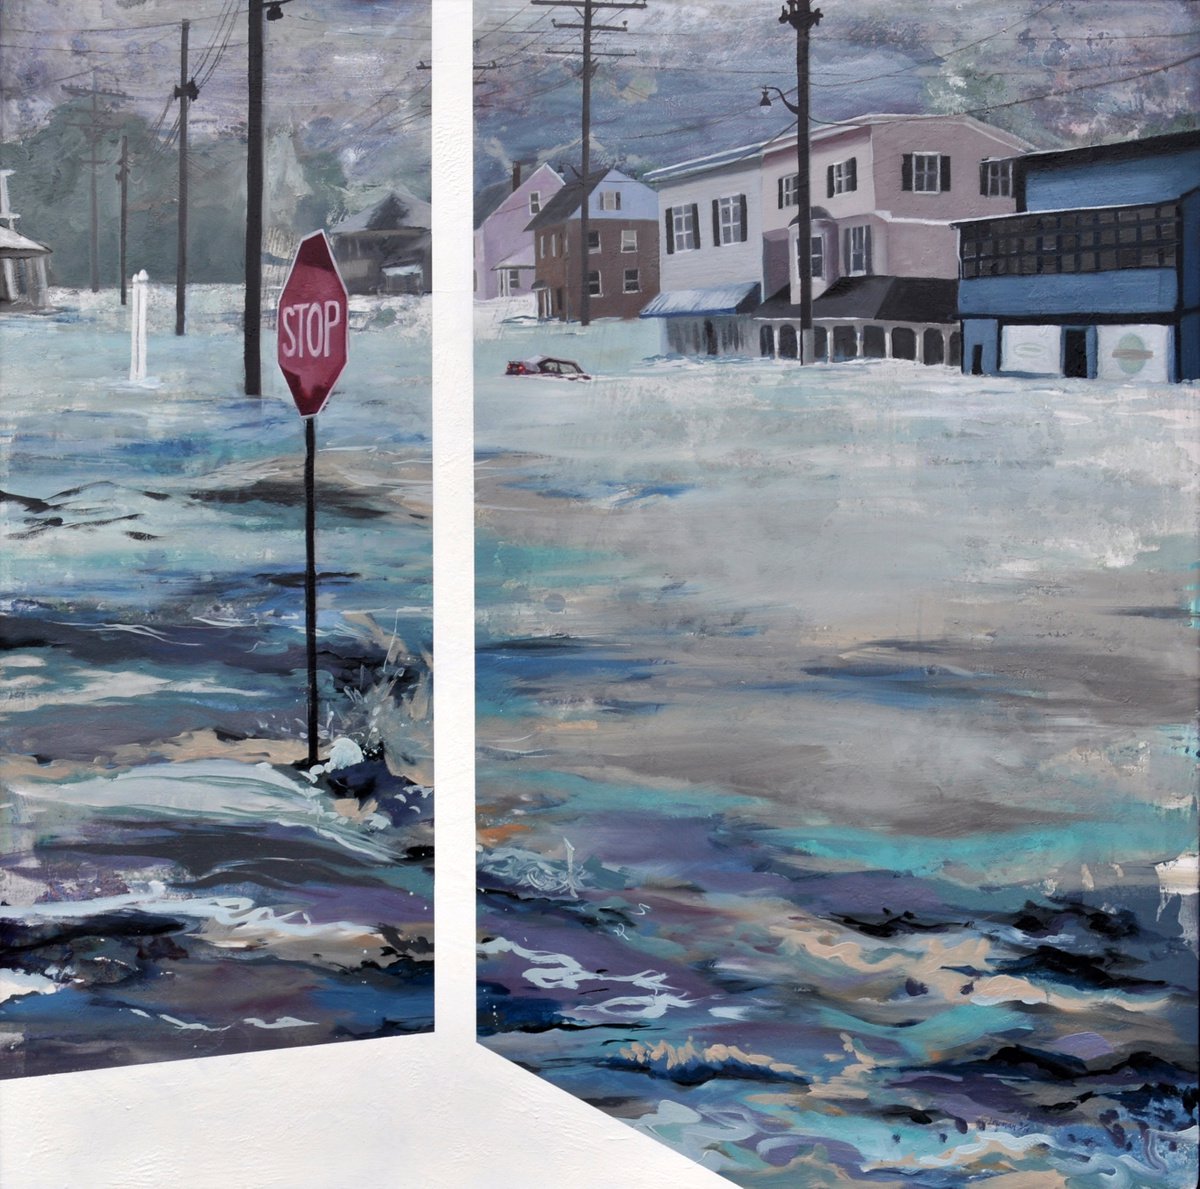 Whole Town Underwater by Leah Lewman Laird